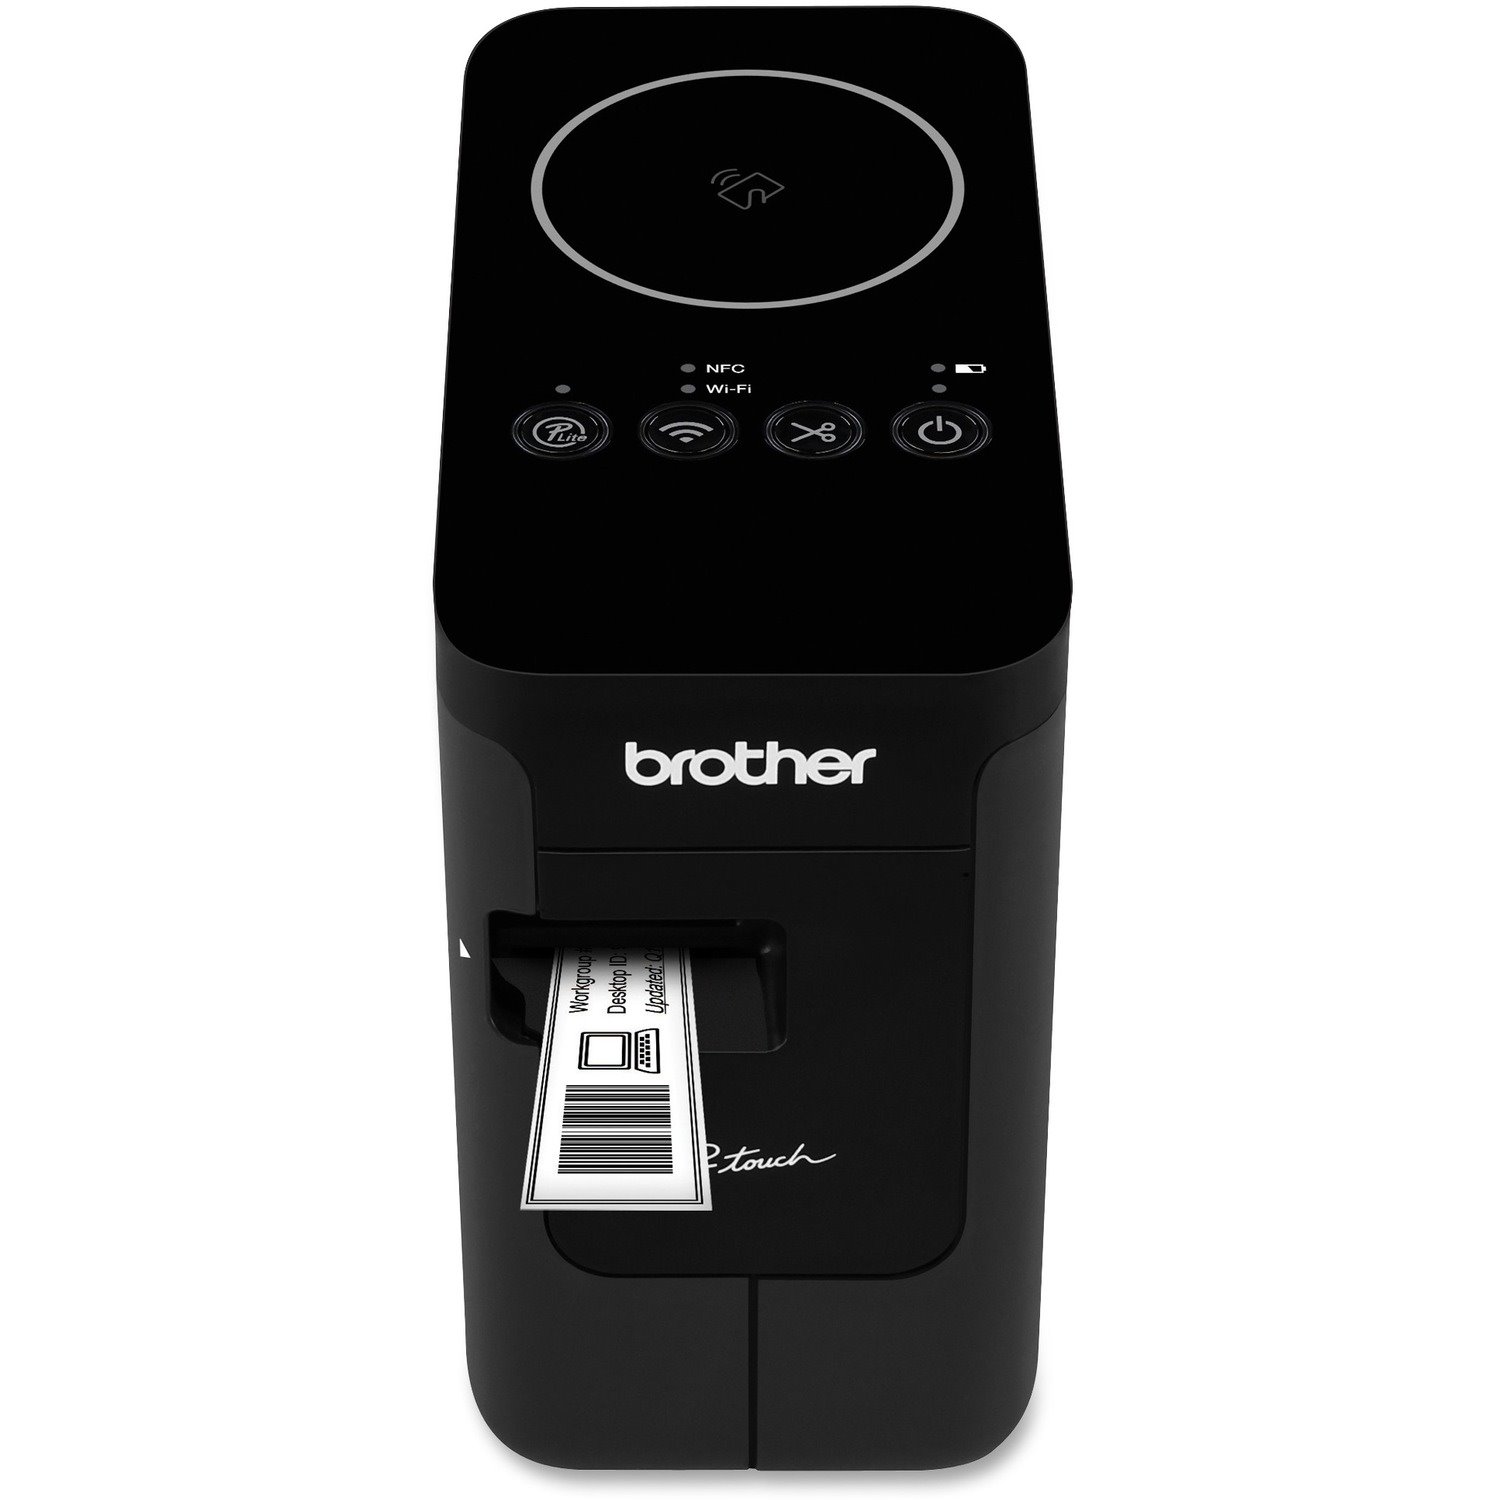 Brother P-touch PT-P750w Desktop Thermal Transfer Printer - Color - Label Print - USB - Wireless LAN - With Cutter